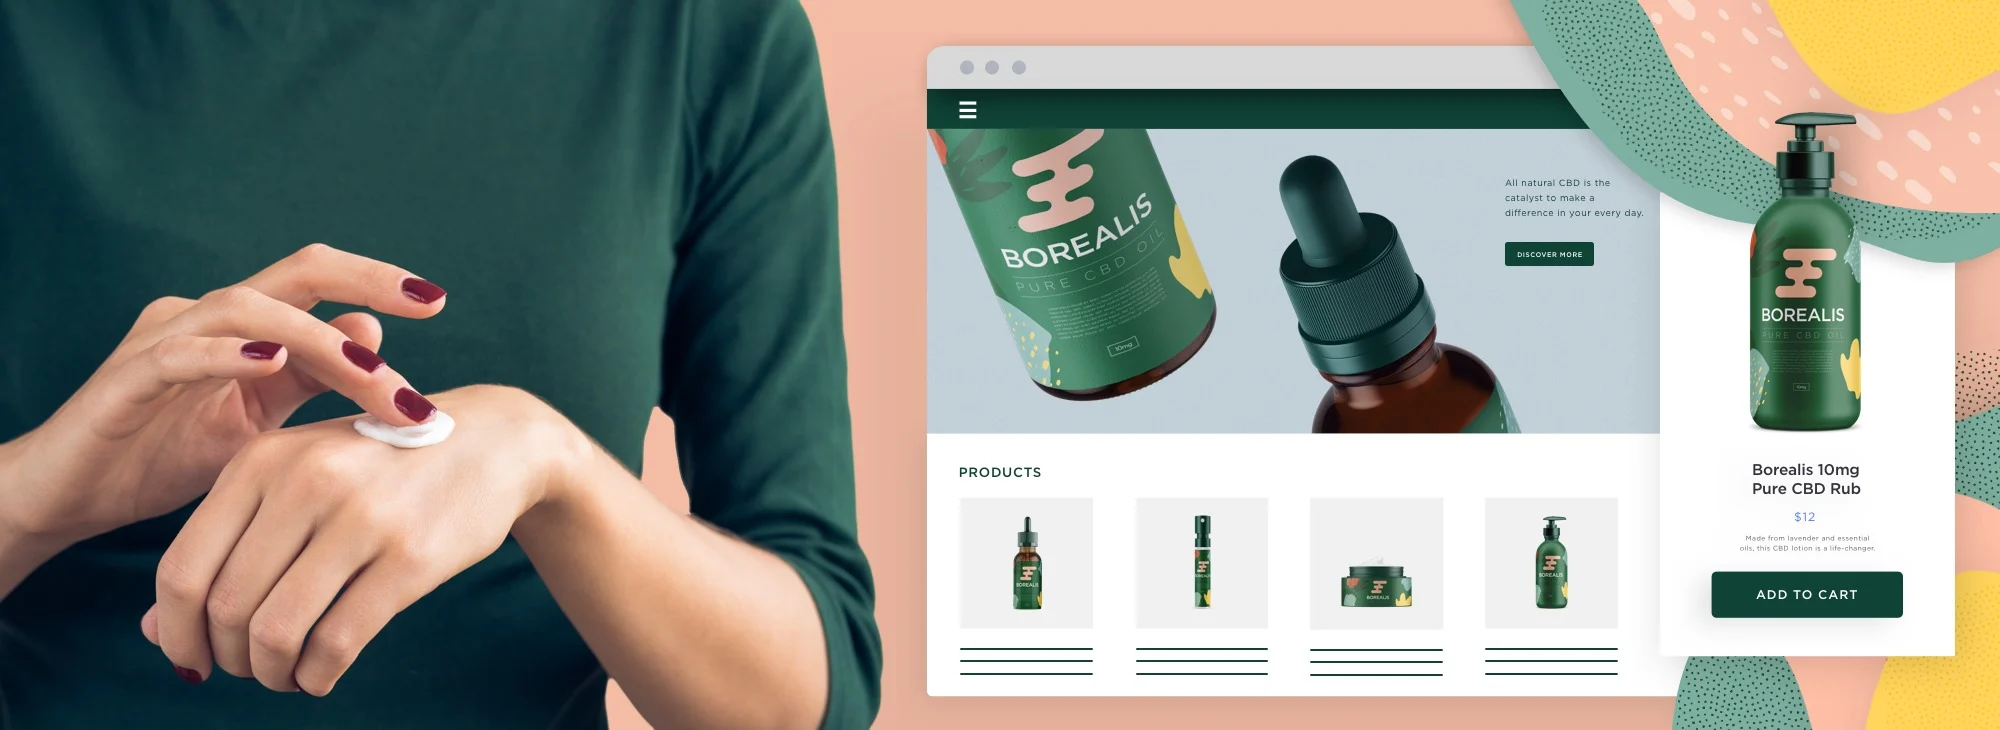 https://cms-wp.bigcommerce.com/wp-content/uploads/2019/08/2019-August-Content-Blog-Headers_Batch-2-1-How-To-Sell-CBD-Online-34CD-MT-@1x.jpg